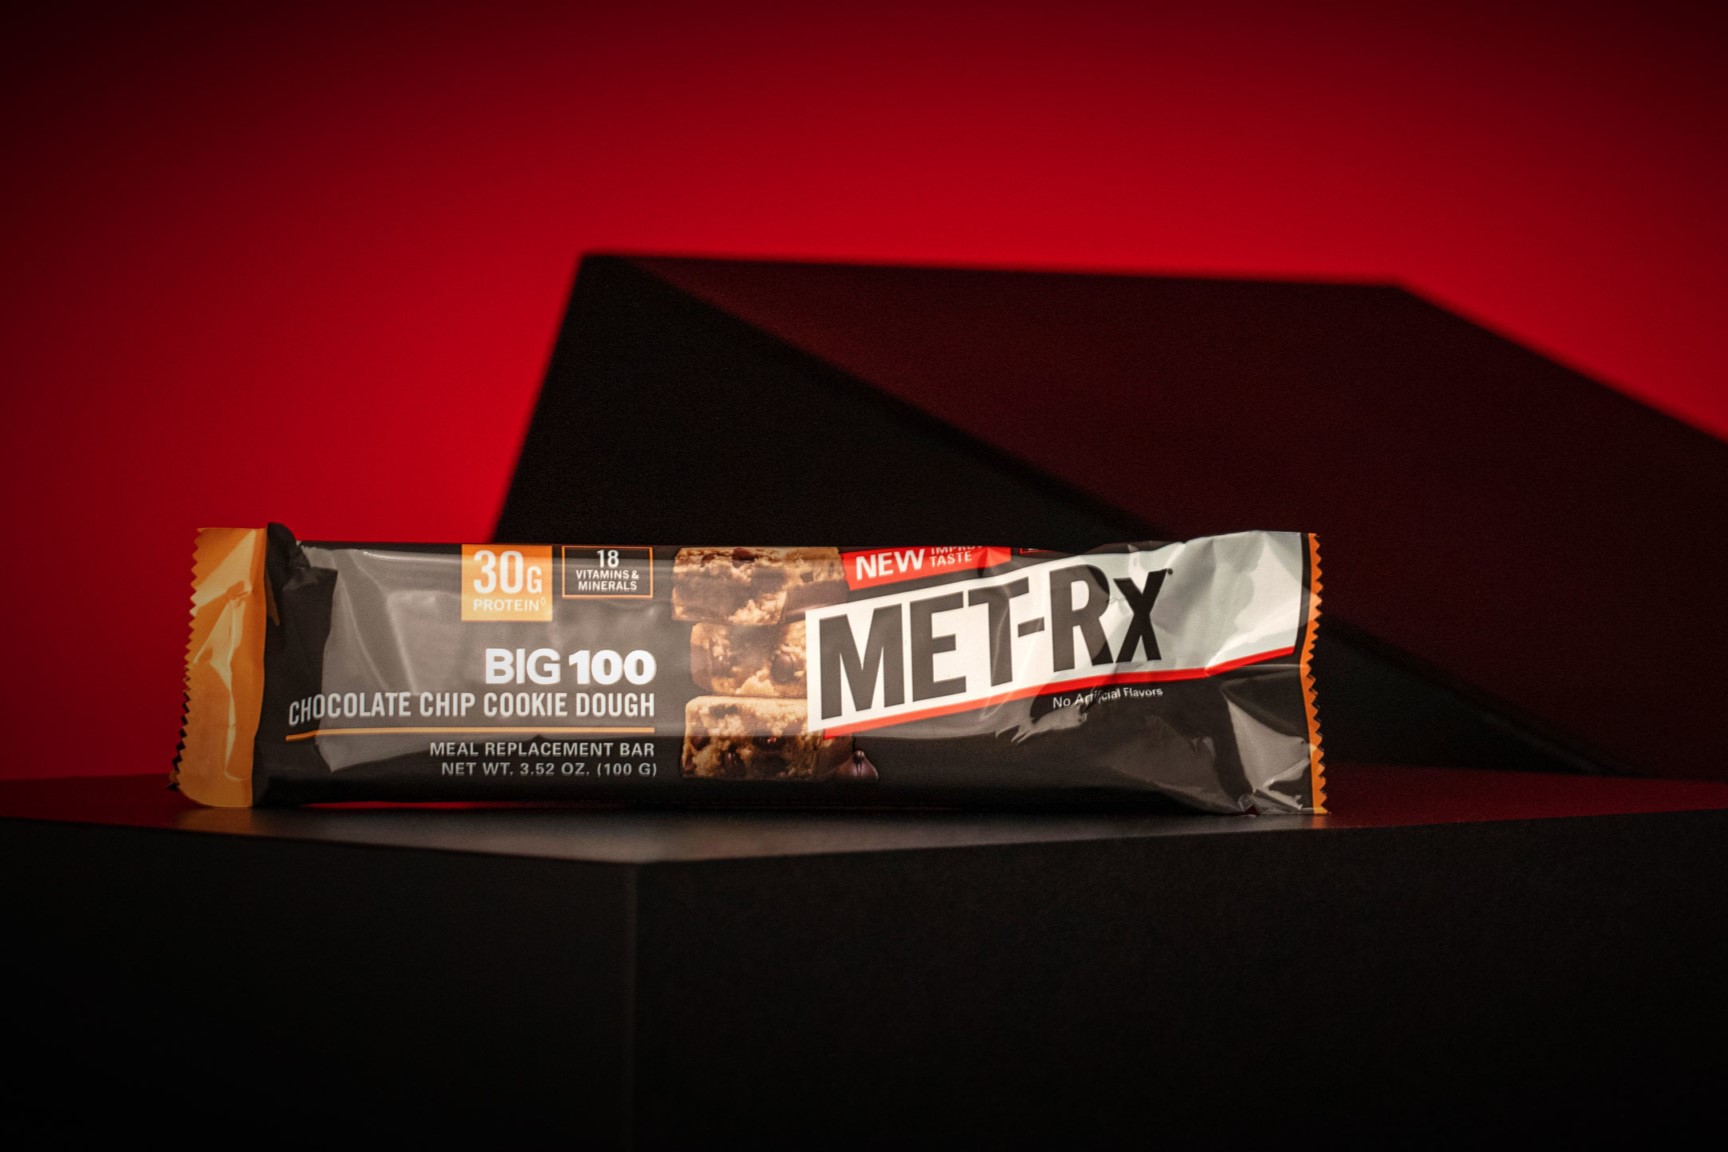 19-met-rx-protein-bar-nutrition-facts